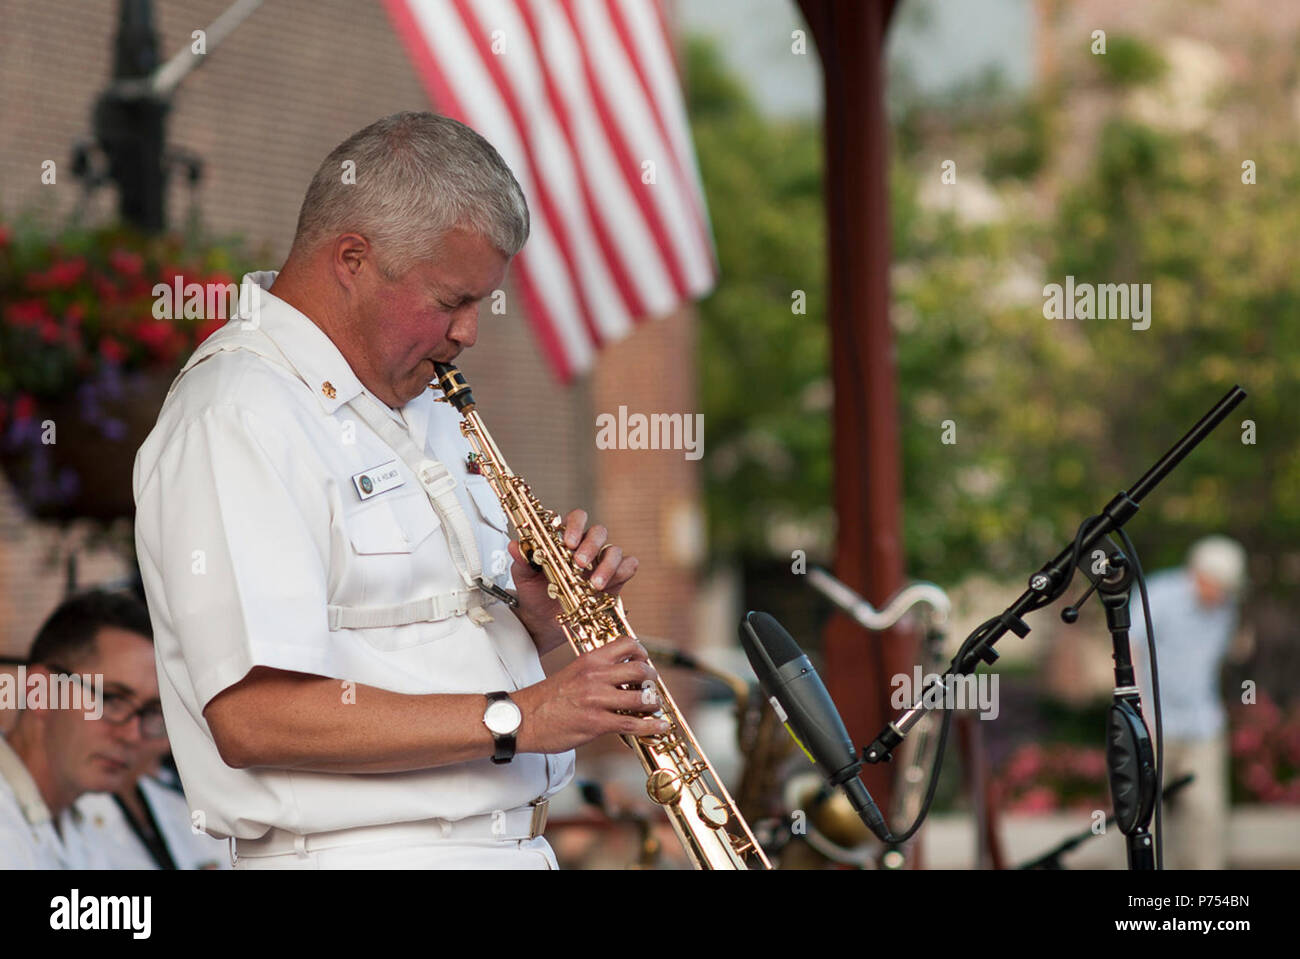 ALEXANDRIA, Va. (August 28, 2015) Chief Musician Rob Holmes, of McLean, Va., takes a soprano saxophone solo with the United States Navy Band Commodores jazz ensemble at Market Square in Old Town. The Commodores play free public concerts throughout the year. Stock Photo